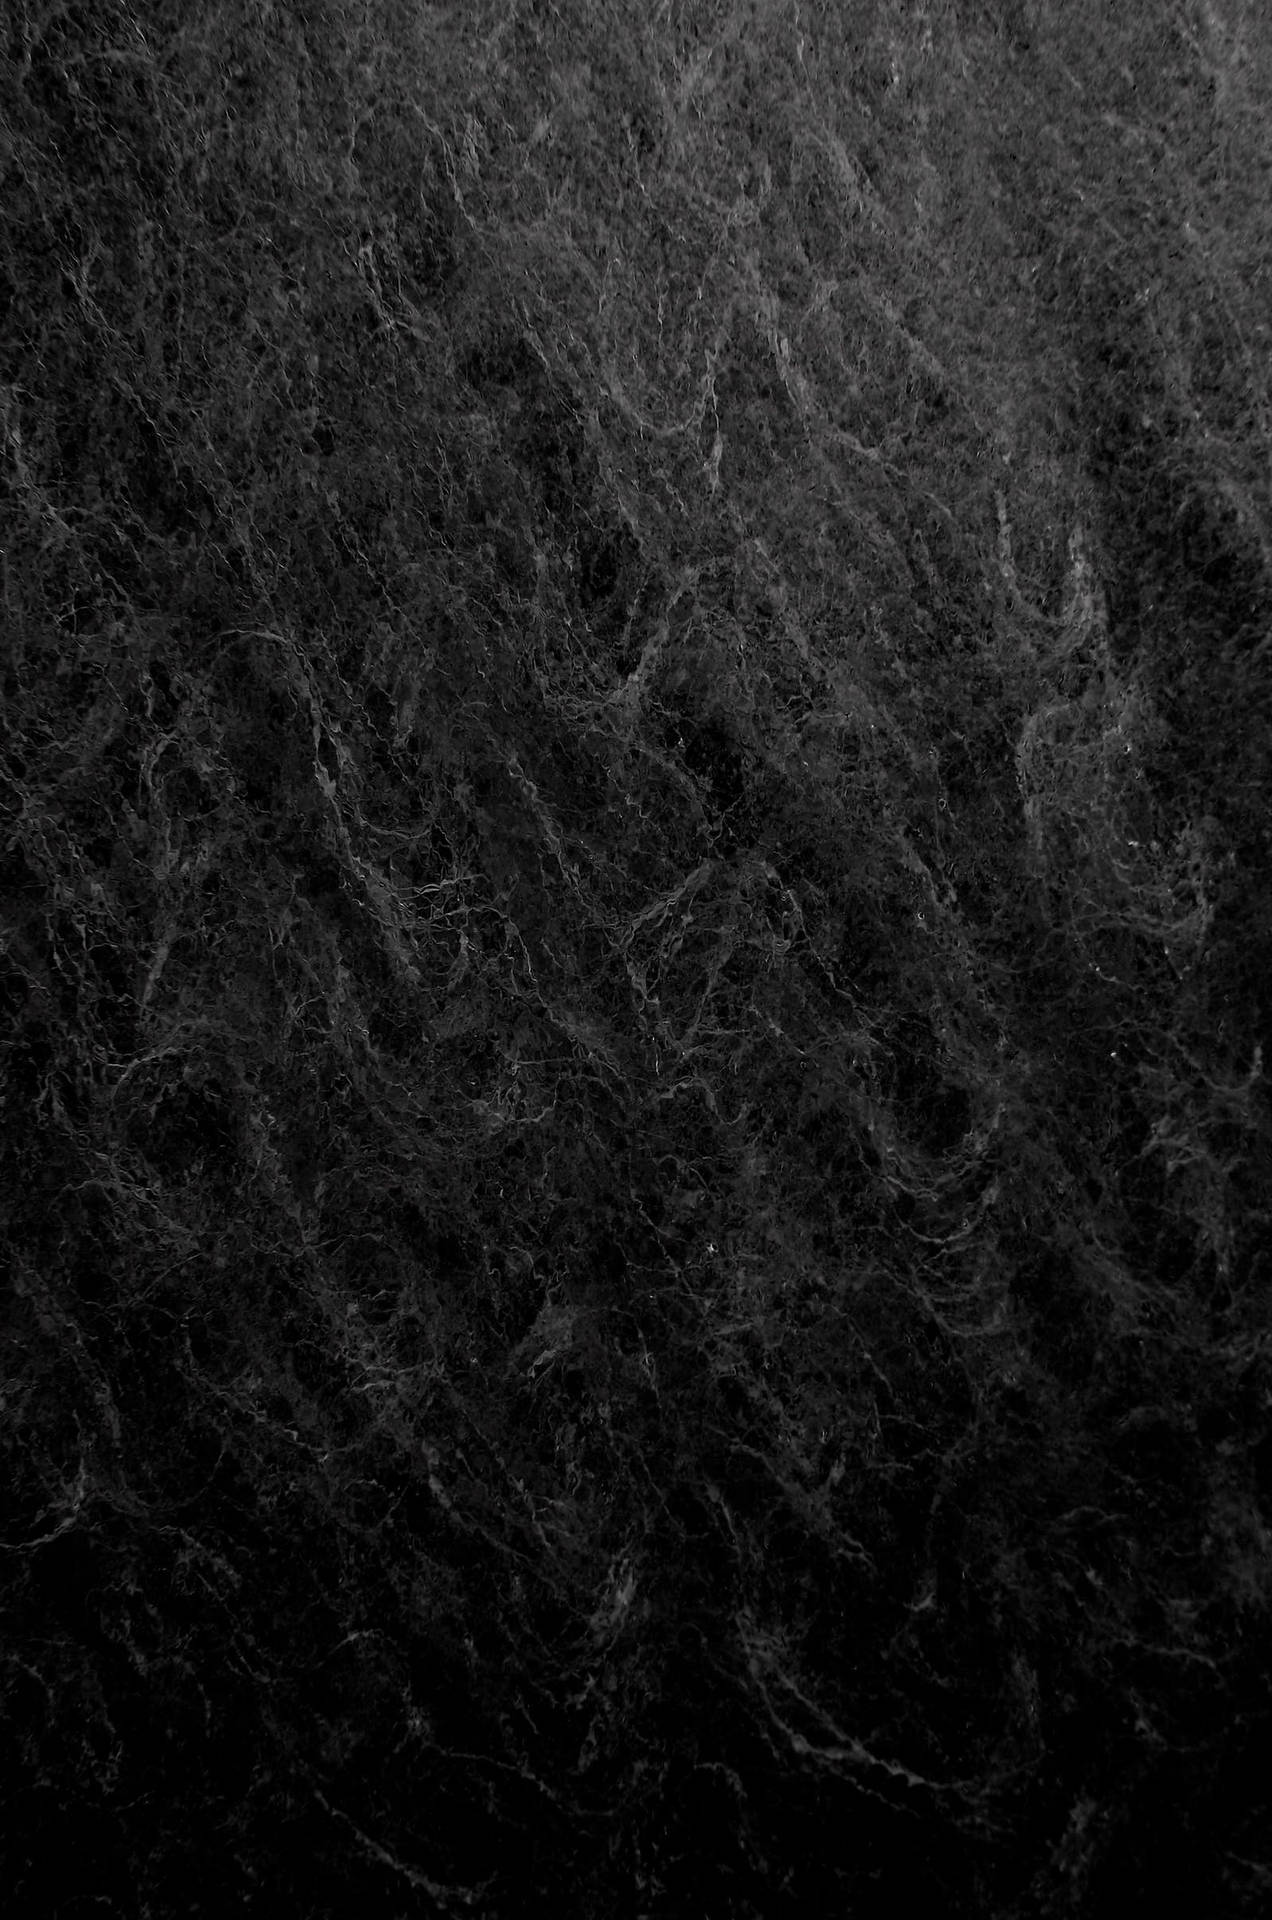 Abstract Waves Black And Grey Iphone